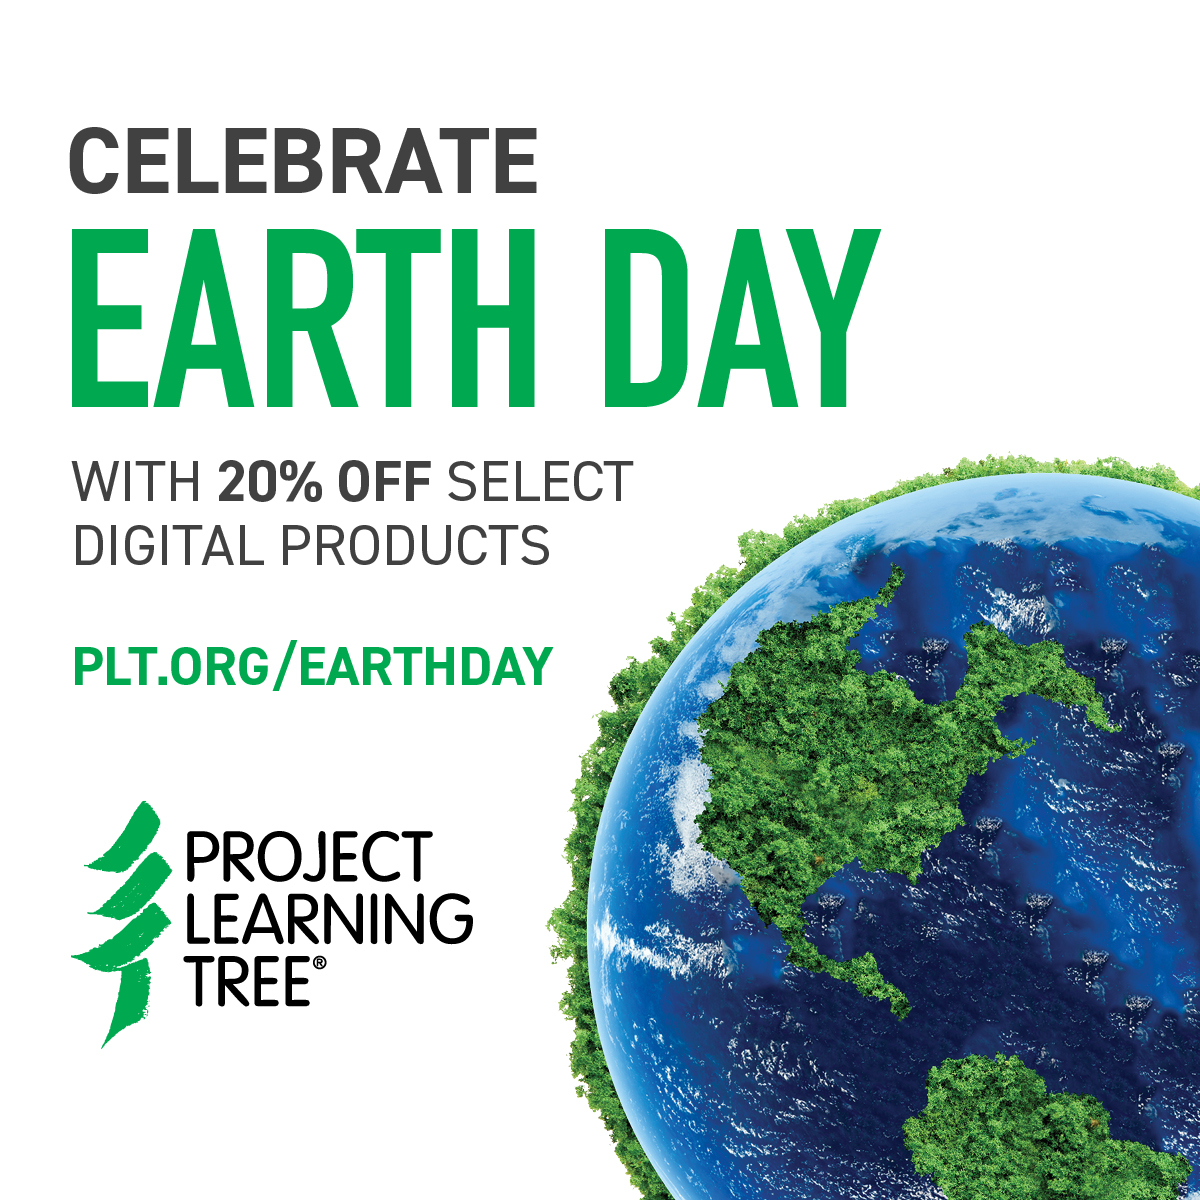 🌍🌳 Celebrate this Earth Day in the best way possible–by inspiring the next generation of environmental stewards! Enjoy 20% off select award-winning #EnviroED resources for all ages with the code EARTHDAY24.
 
Explore this offer now until May 18 at plt.org/earthday.